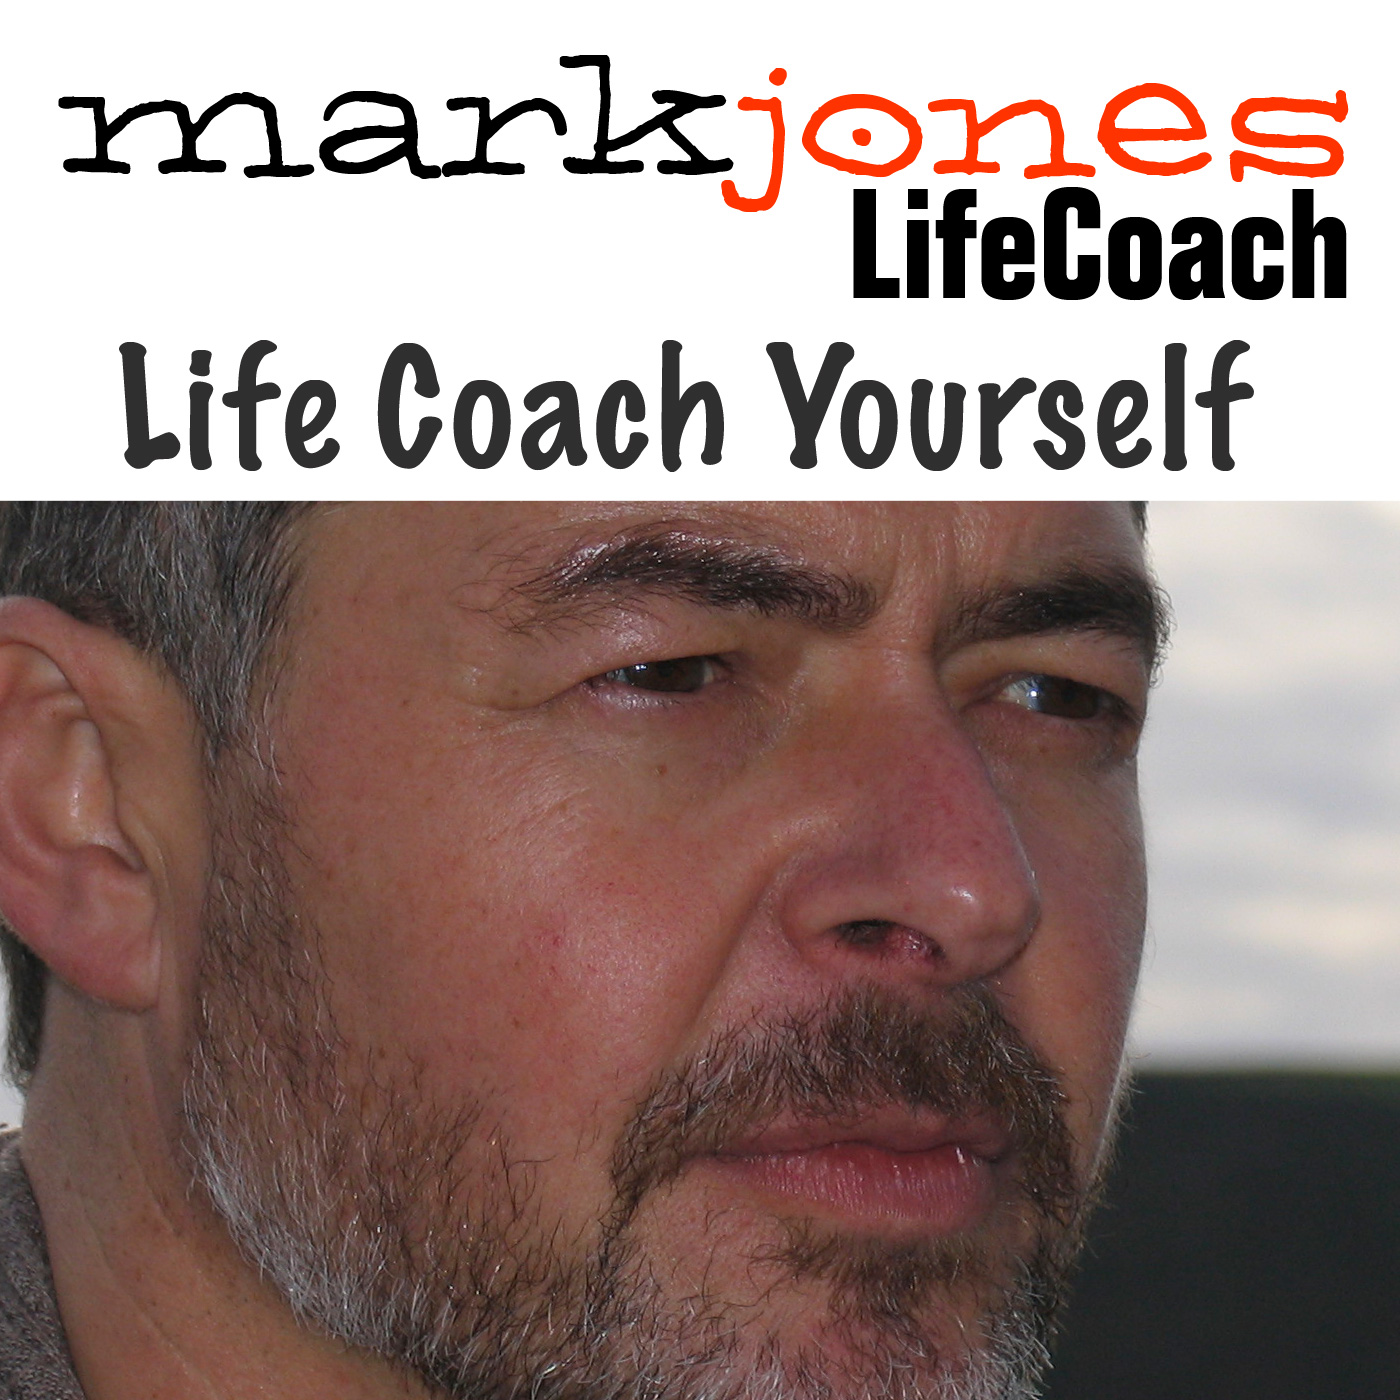 Life Coach Yourself Podcast 002 with Mark Jones - Affirmations